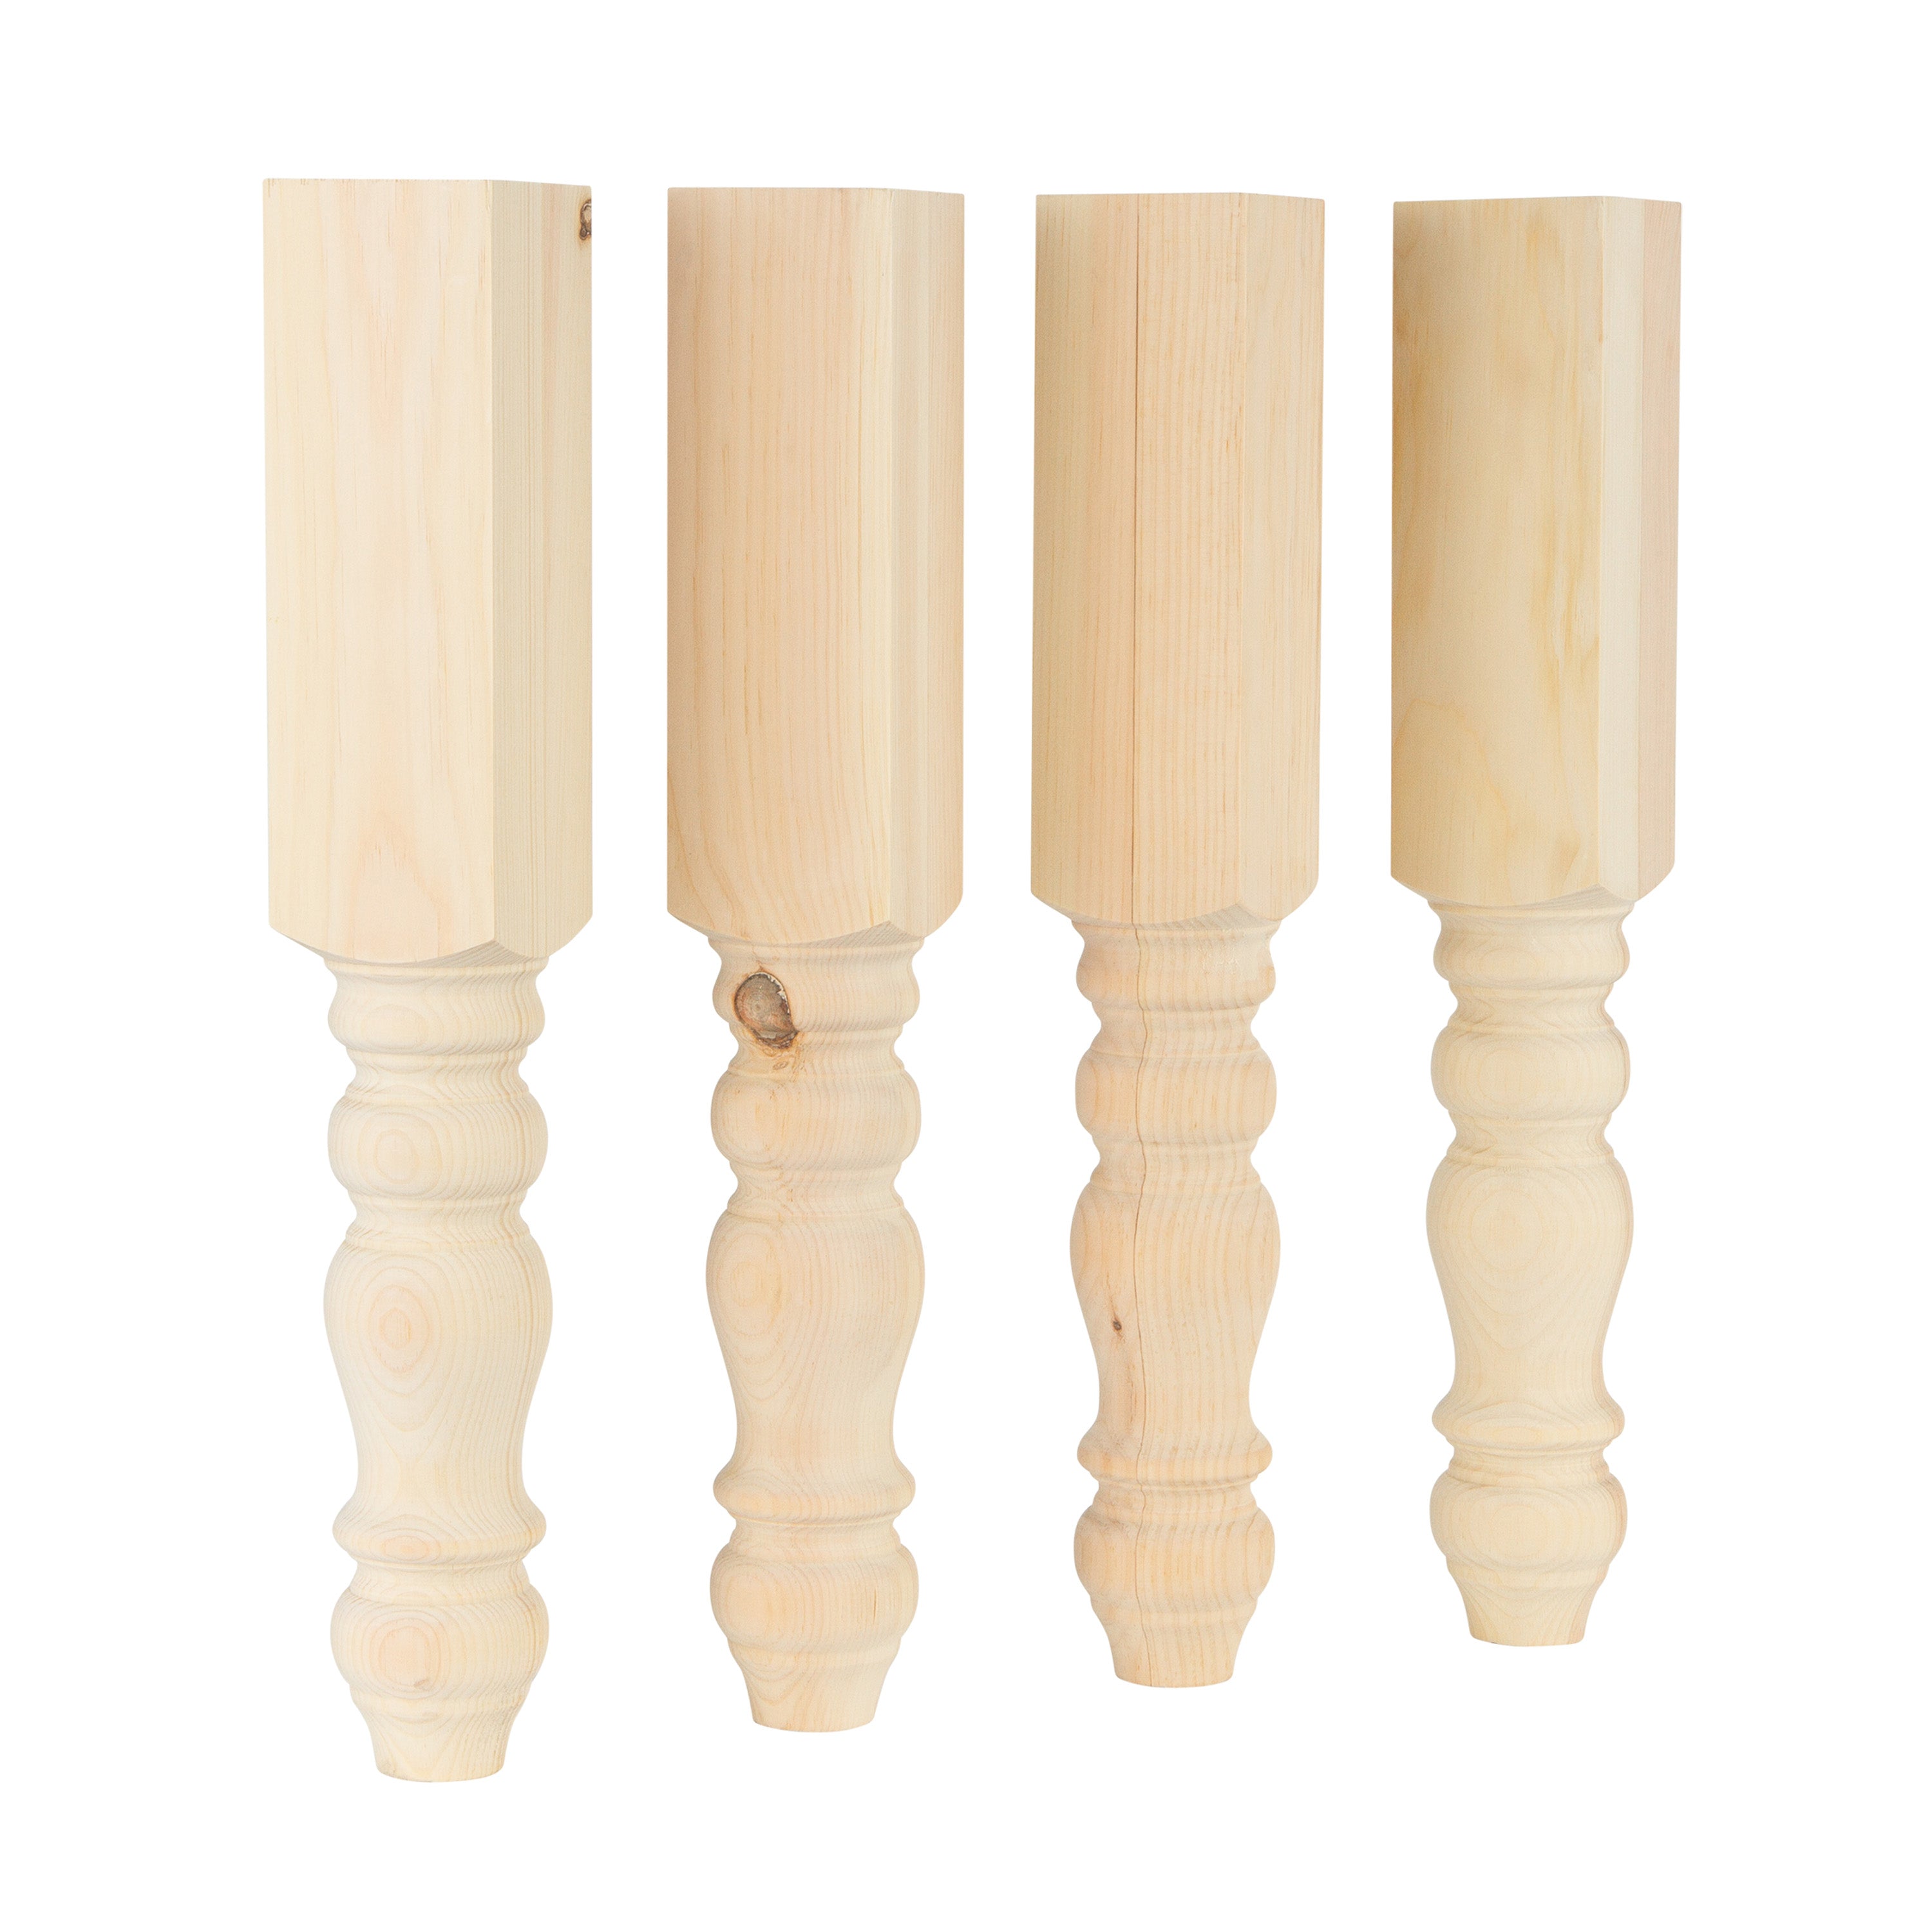 Pine Chunky Farmhouse End Table Legs - 3.5" x 23" - Sustainably Harvested American Pine - Handmade in NC by Carolina Leg Co